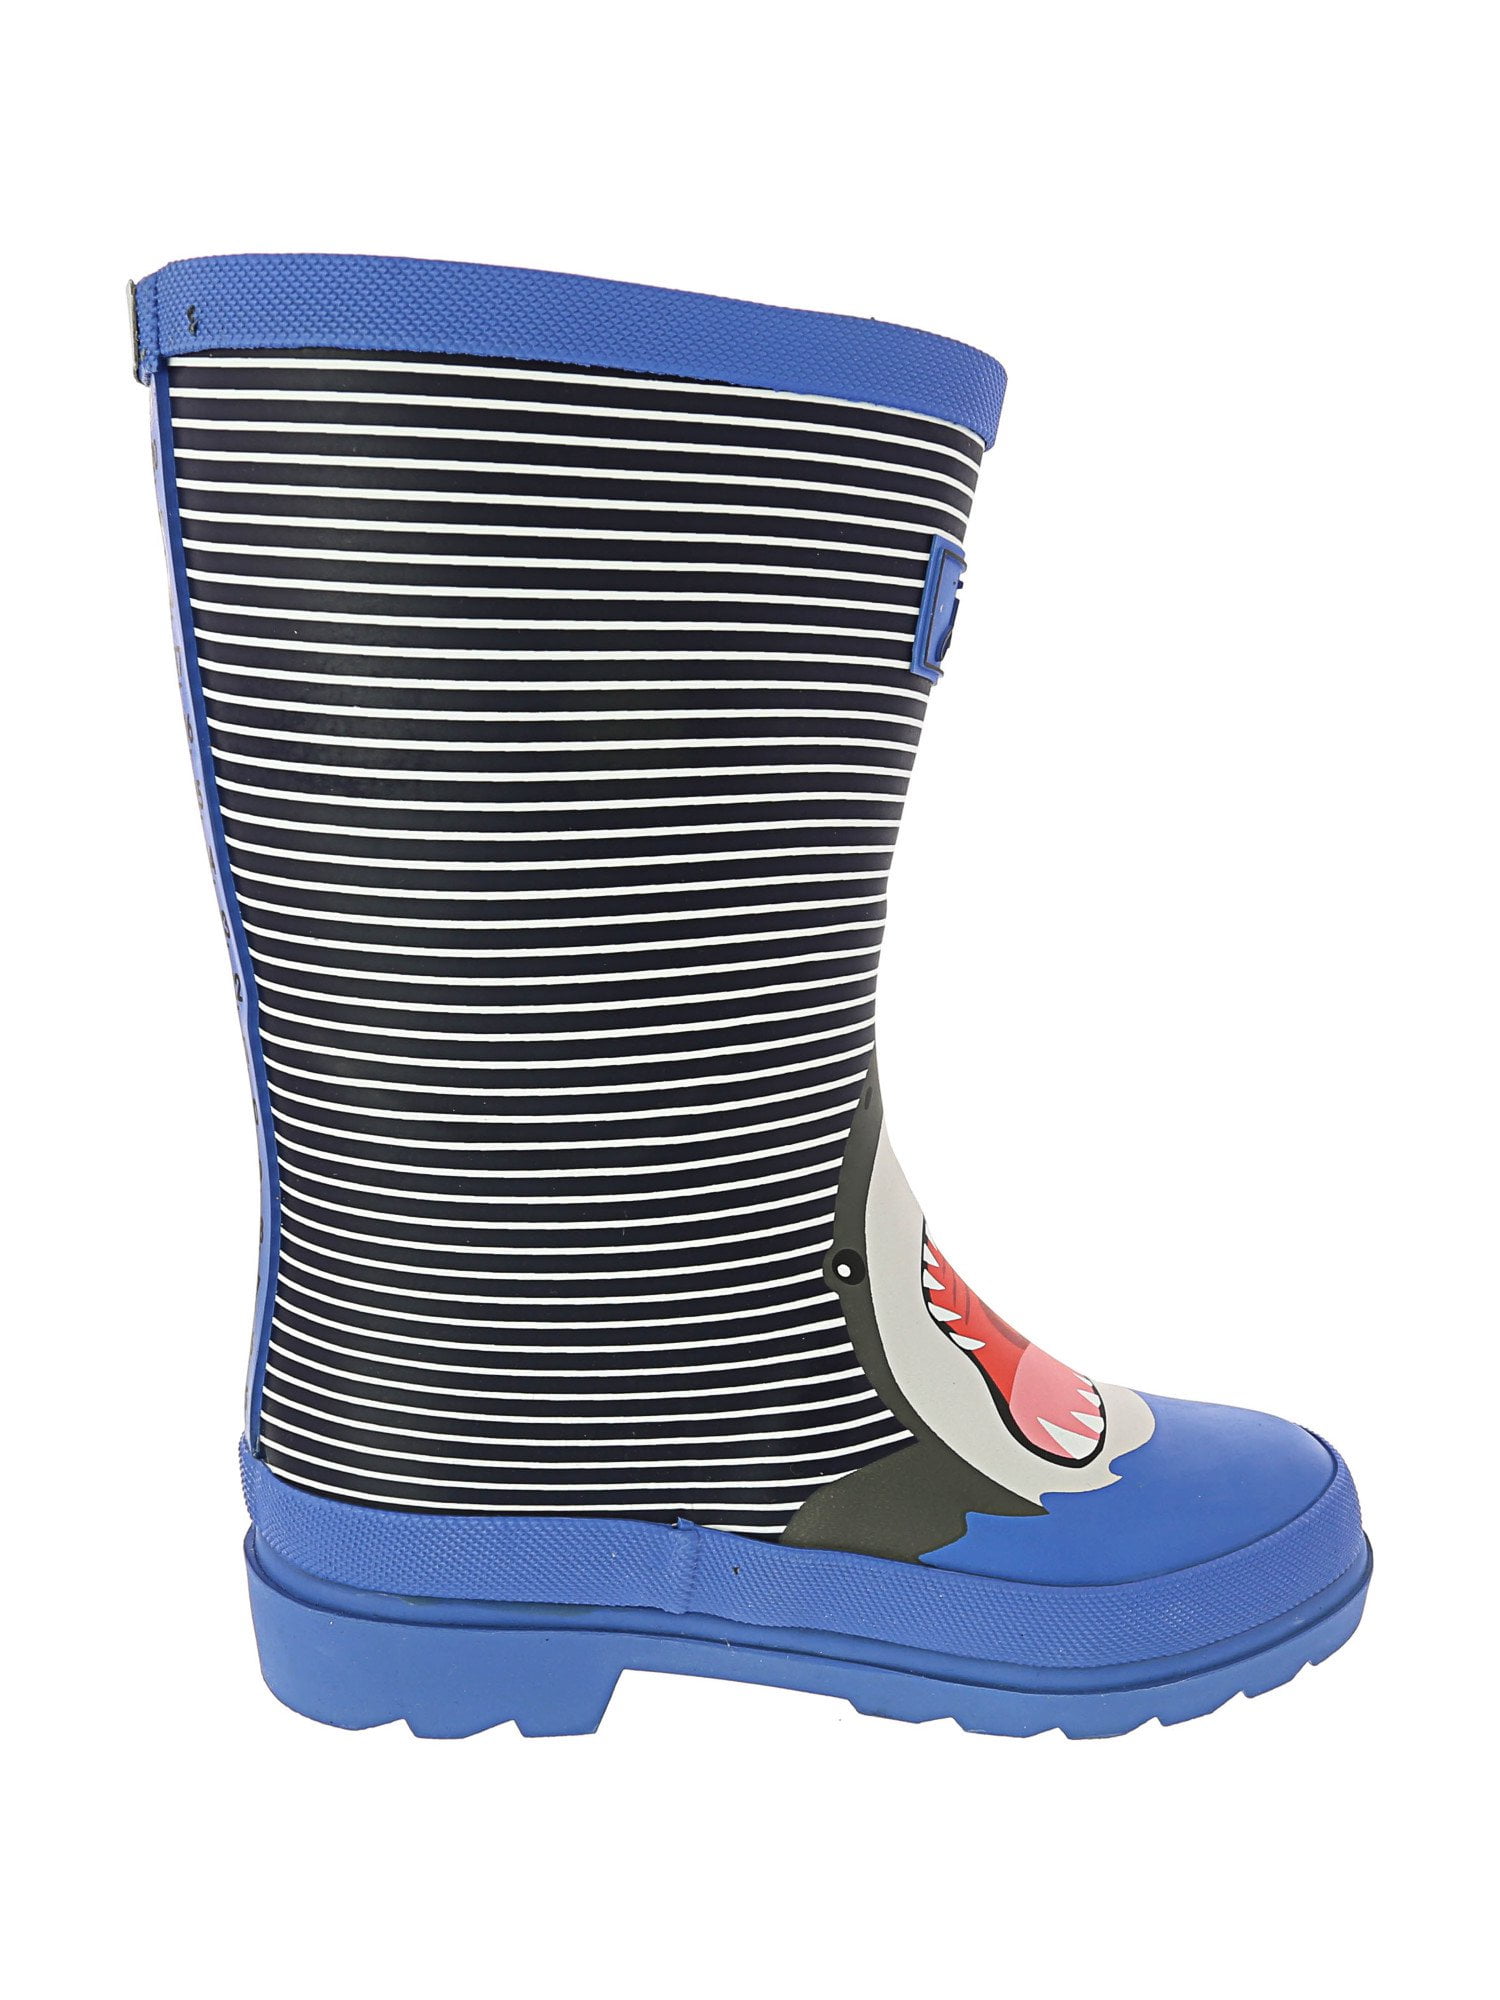 French Navy Fay Floral Joules Welly Print Boots SALE 40% OFF